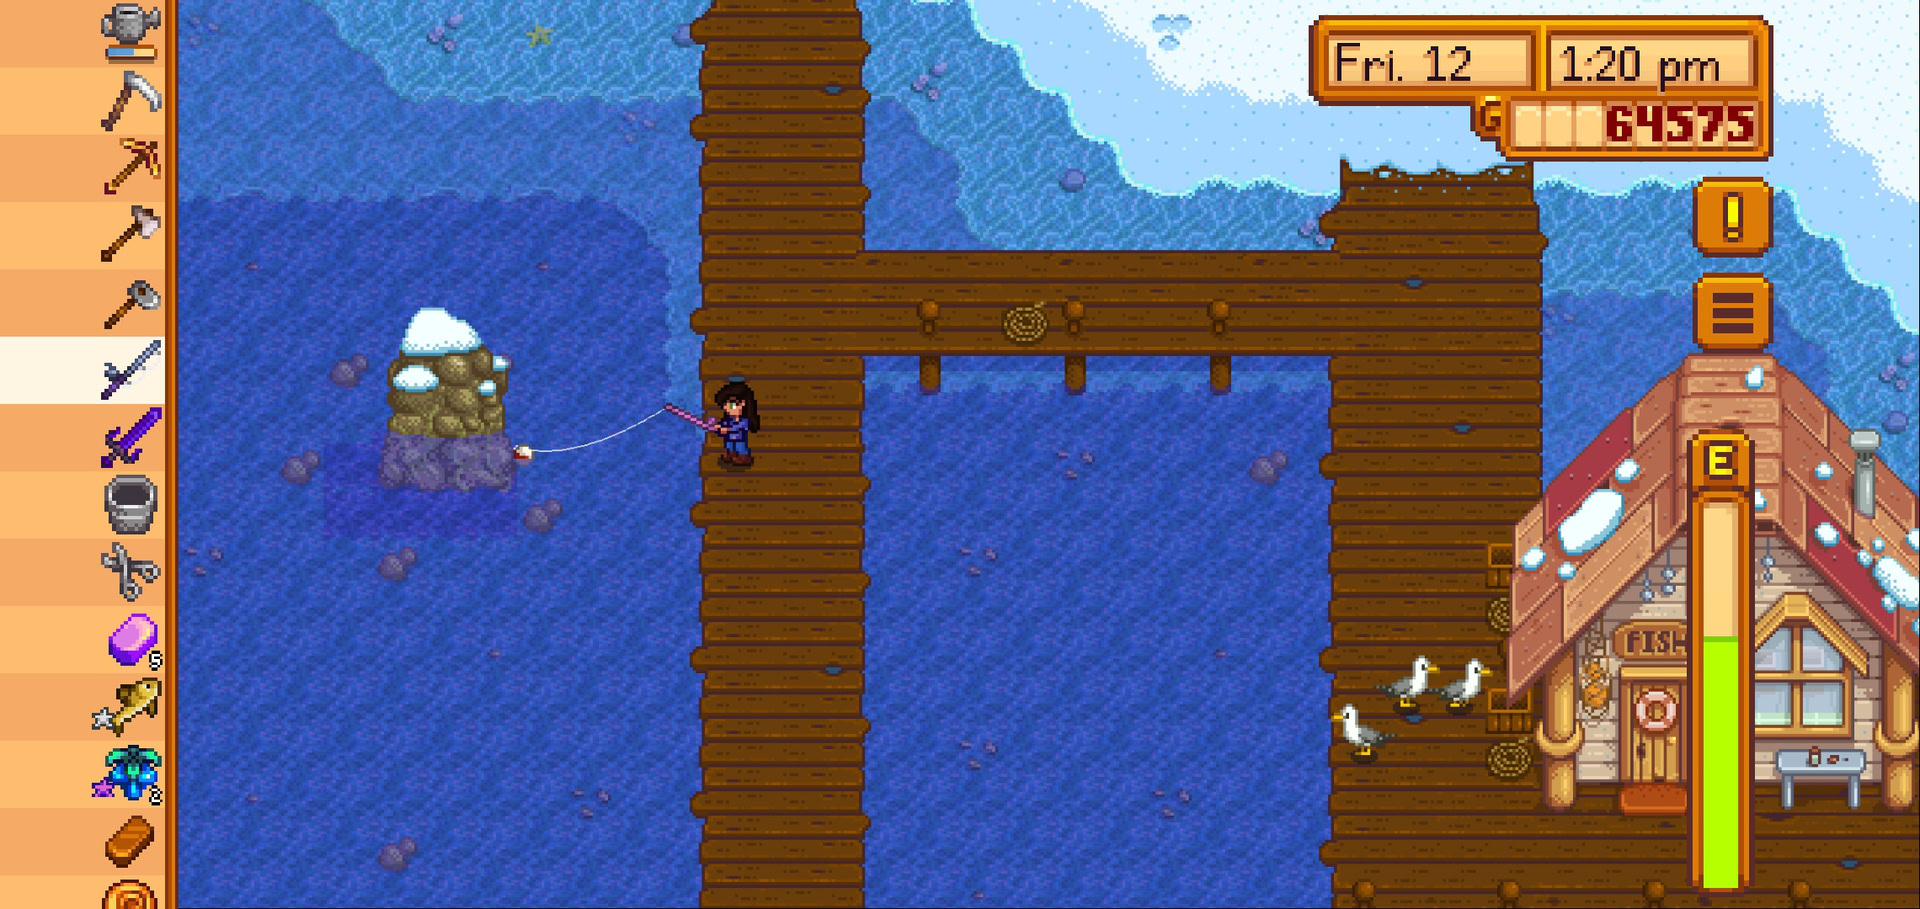 stardew valley fishing guide community center